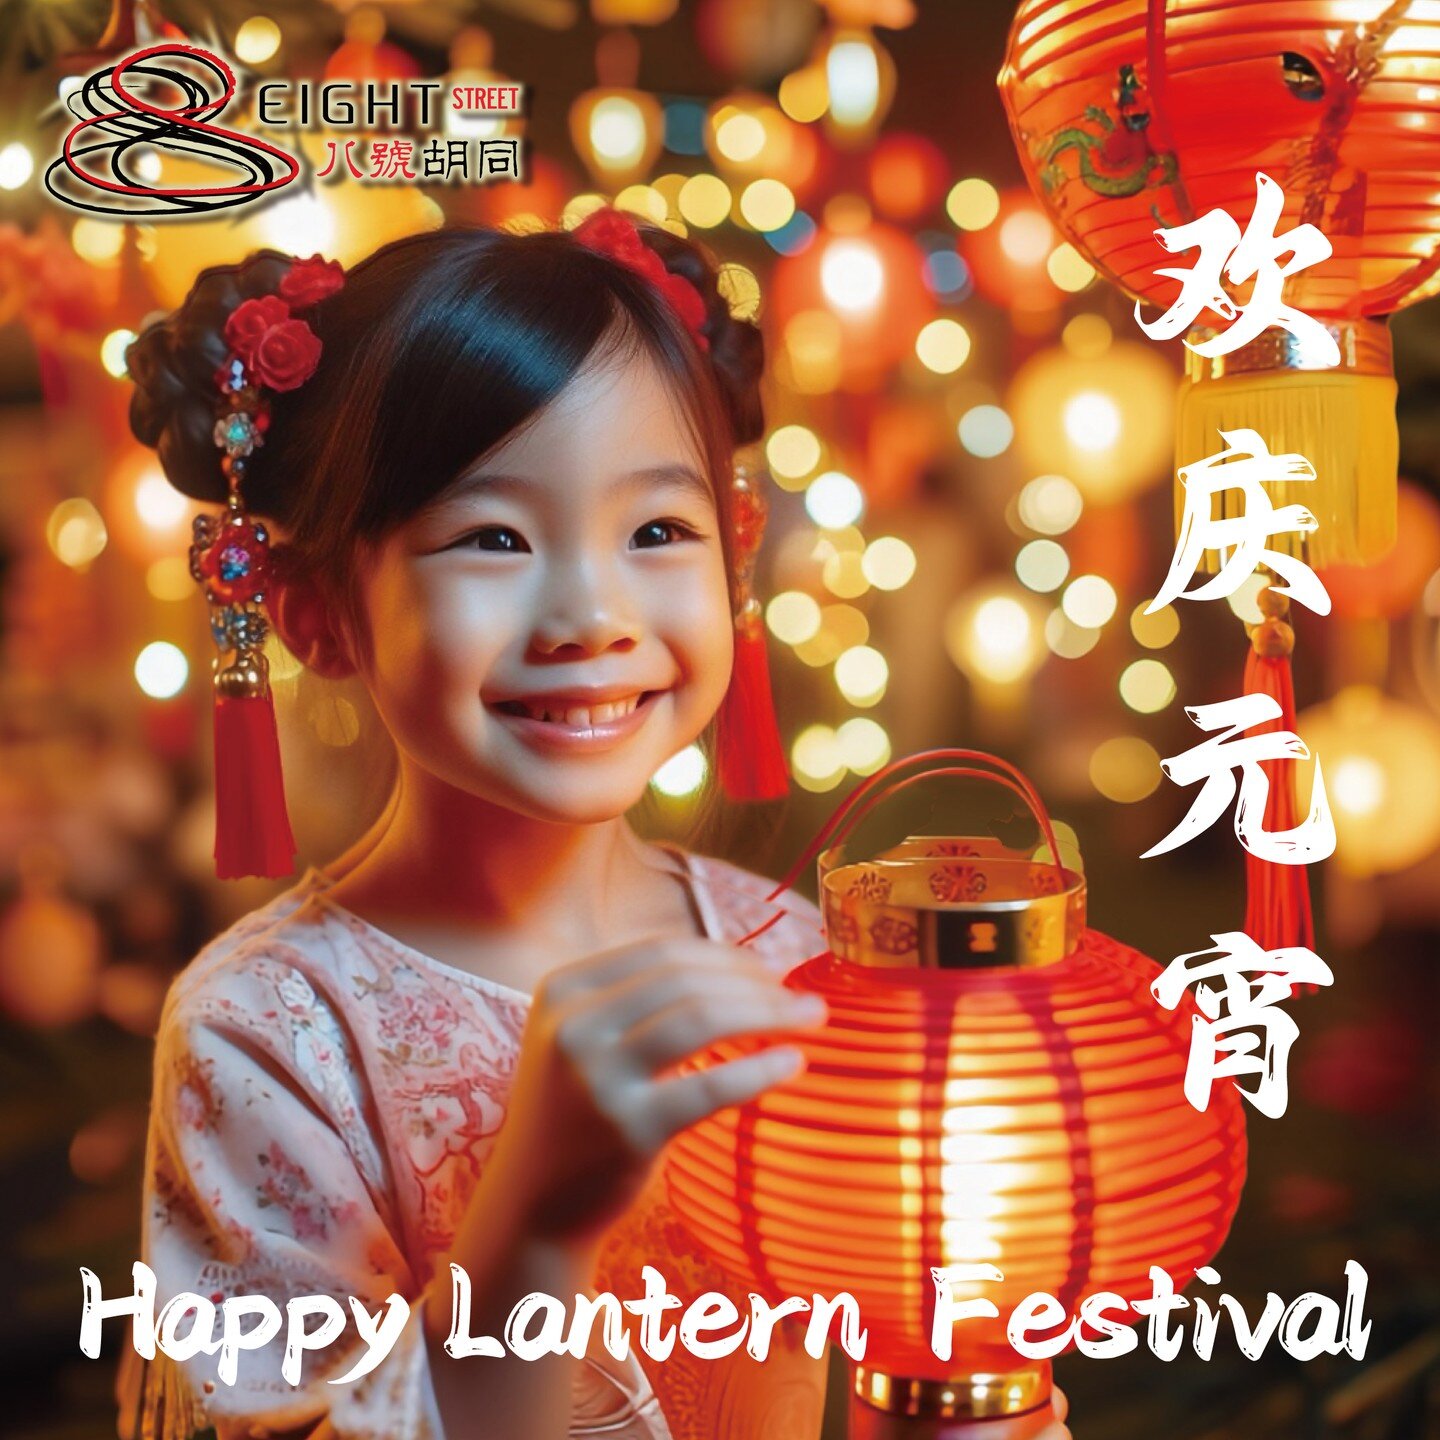 The Lantern Festival, also known as Yuanxiao Festival&mdash;a vibrant celebration deeply embedded in Chinese culture. Imagine the 15th day of the lunar calendar, the first full moon of the year. Families and friends unite to craft and release stunnin